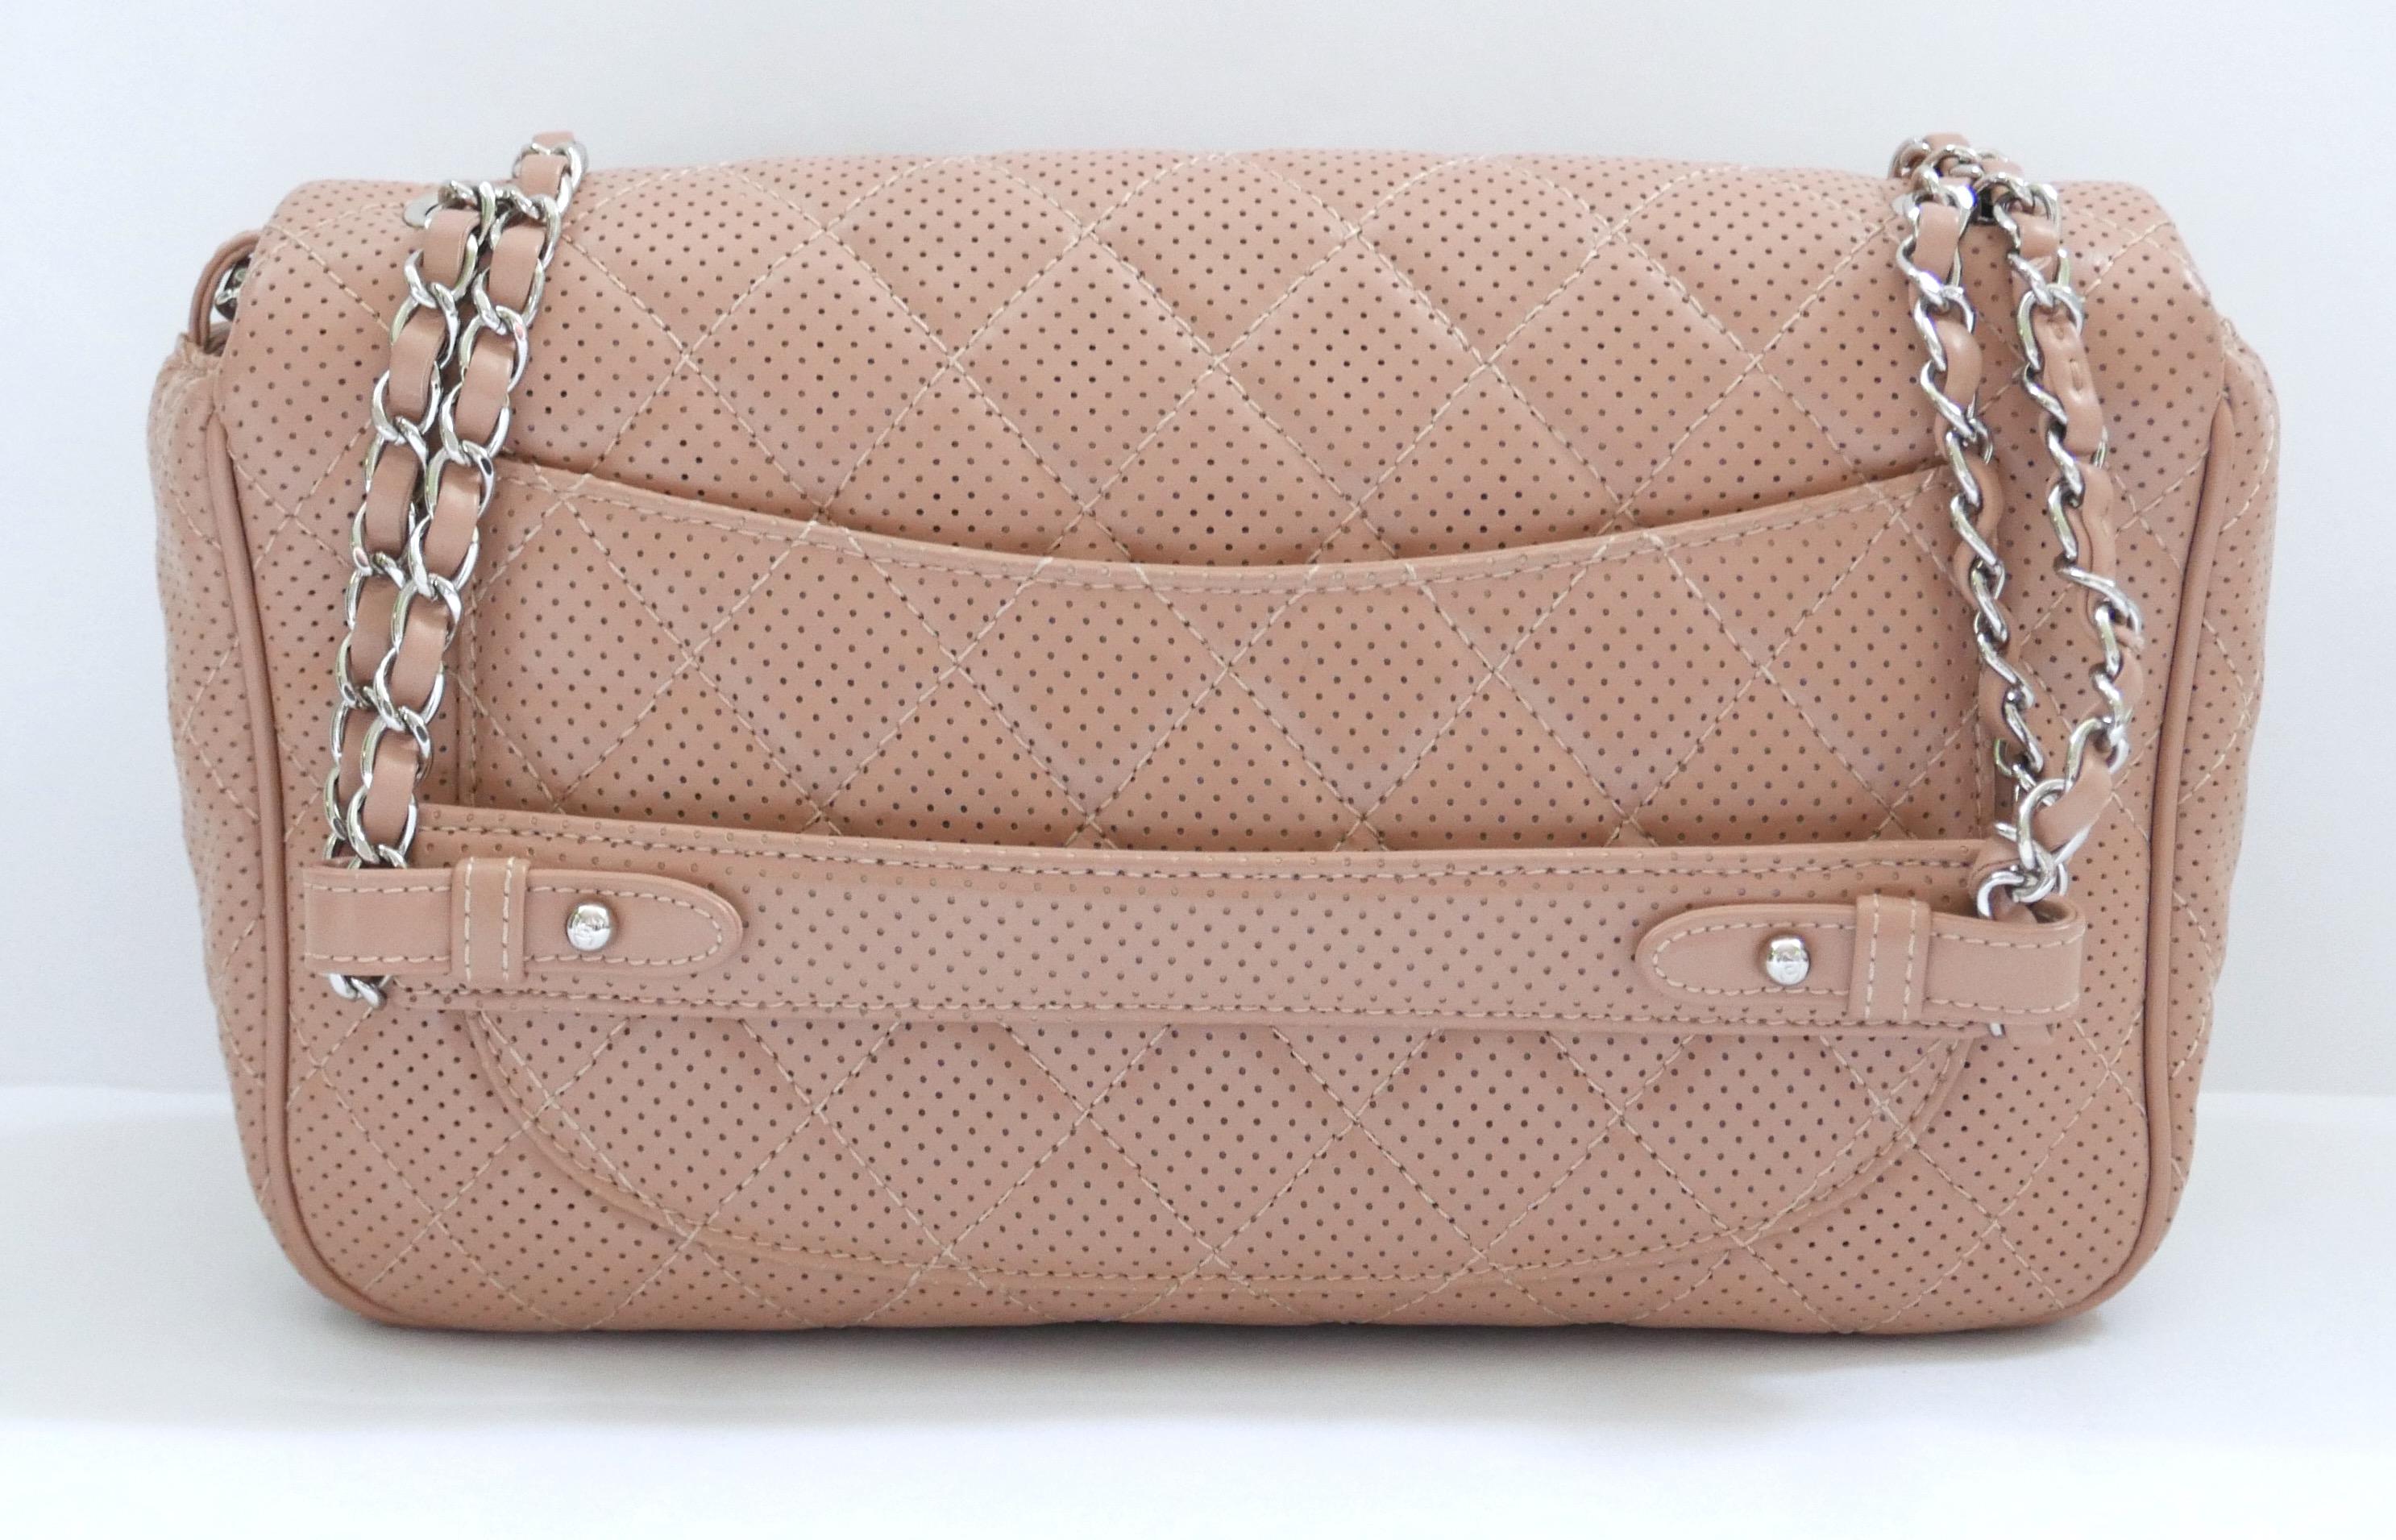 Women's Chanel Beige Perforated Leather Classique Flap Bag For Sale